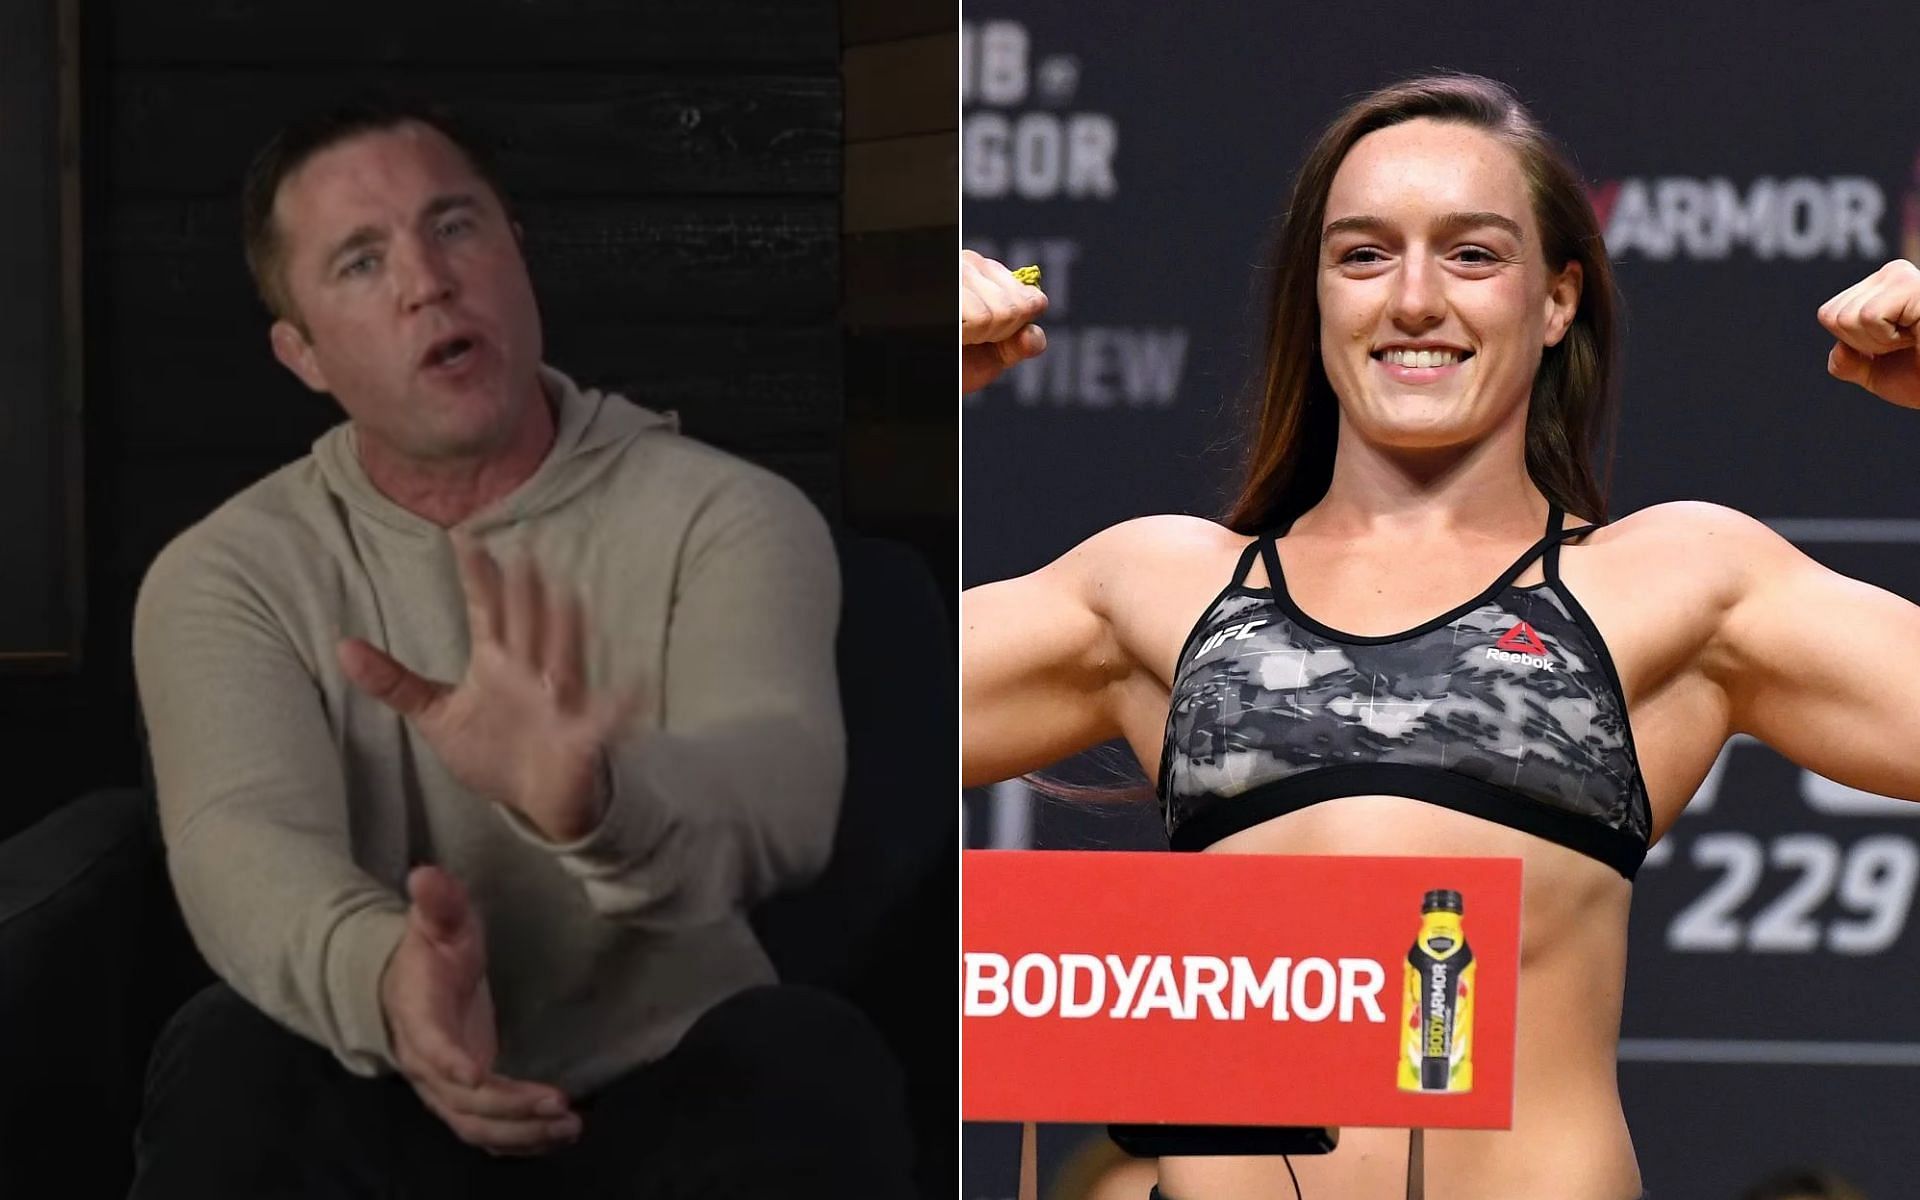 Chael Sonnen [Left], and Aspen Ladd [Right] [Photo credit: Chael Sonnen - YouTube]